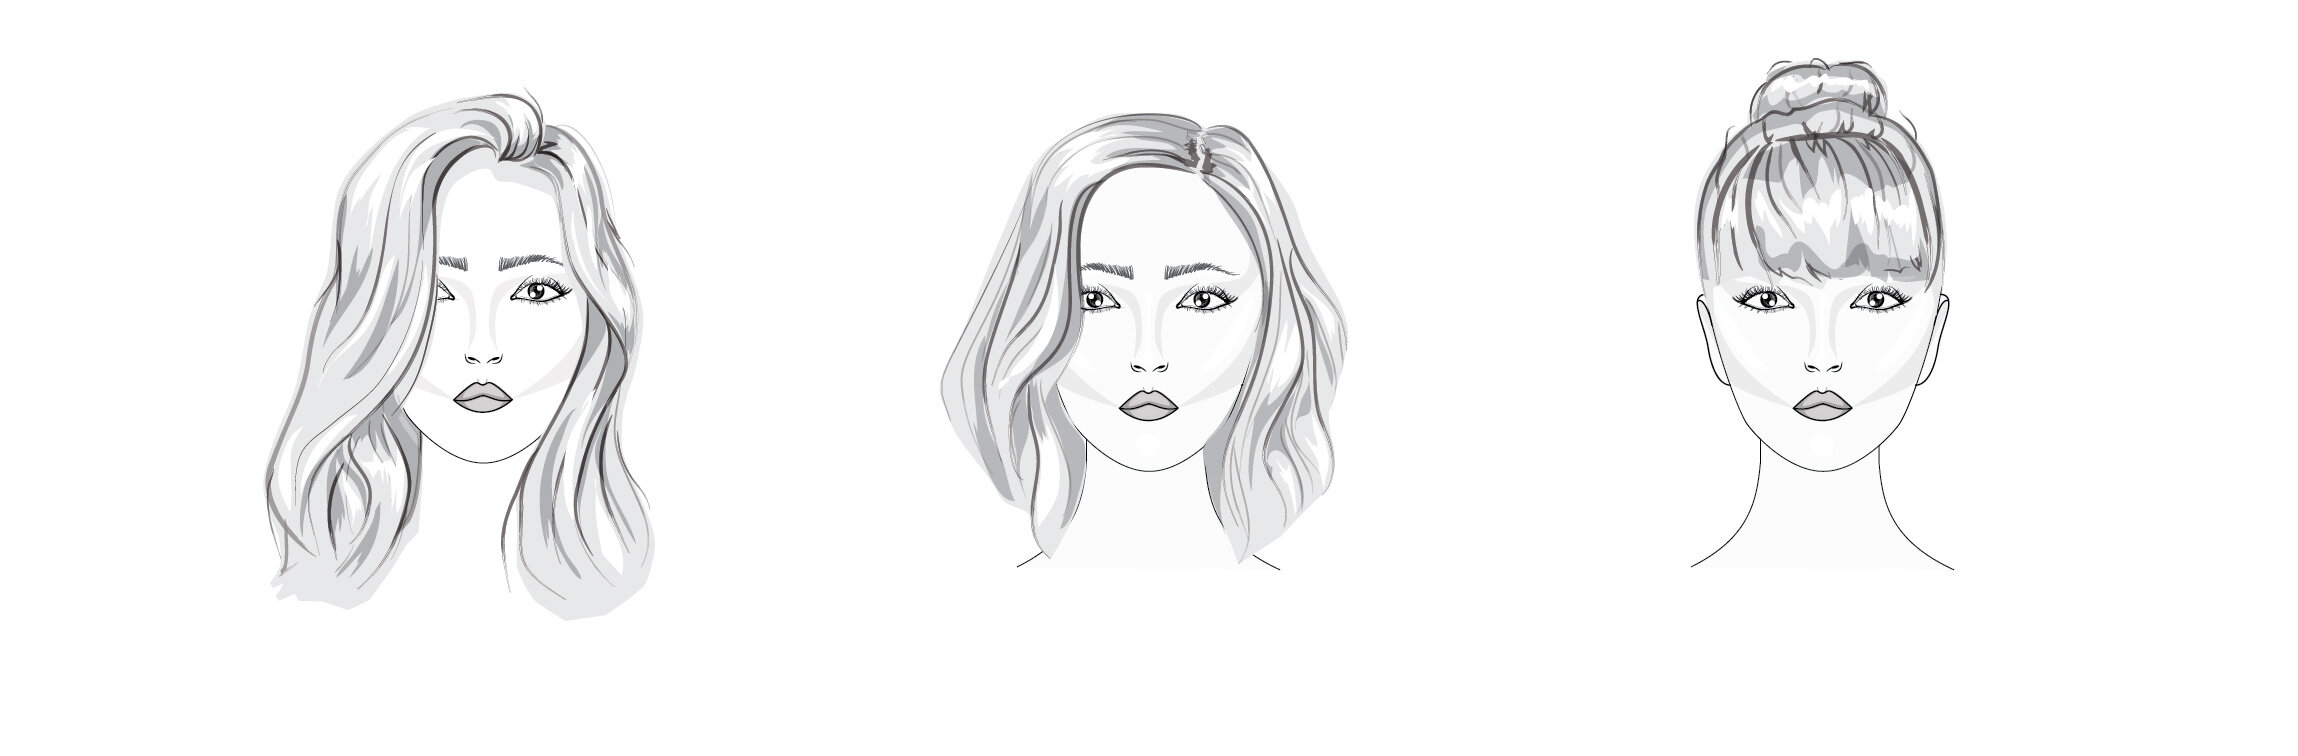 How to Draw Hair: 5 Tips for Fashion Sketching | MyBodyModel